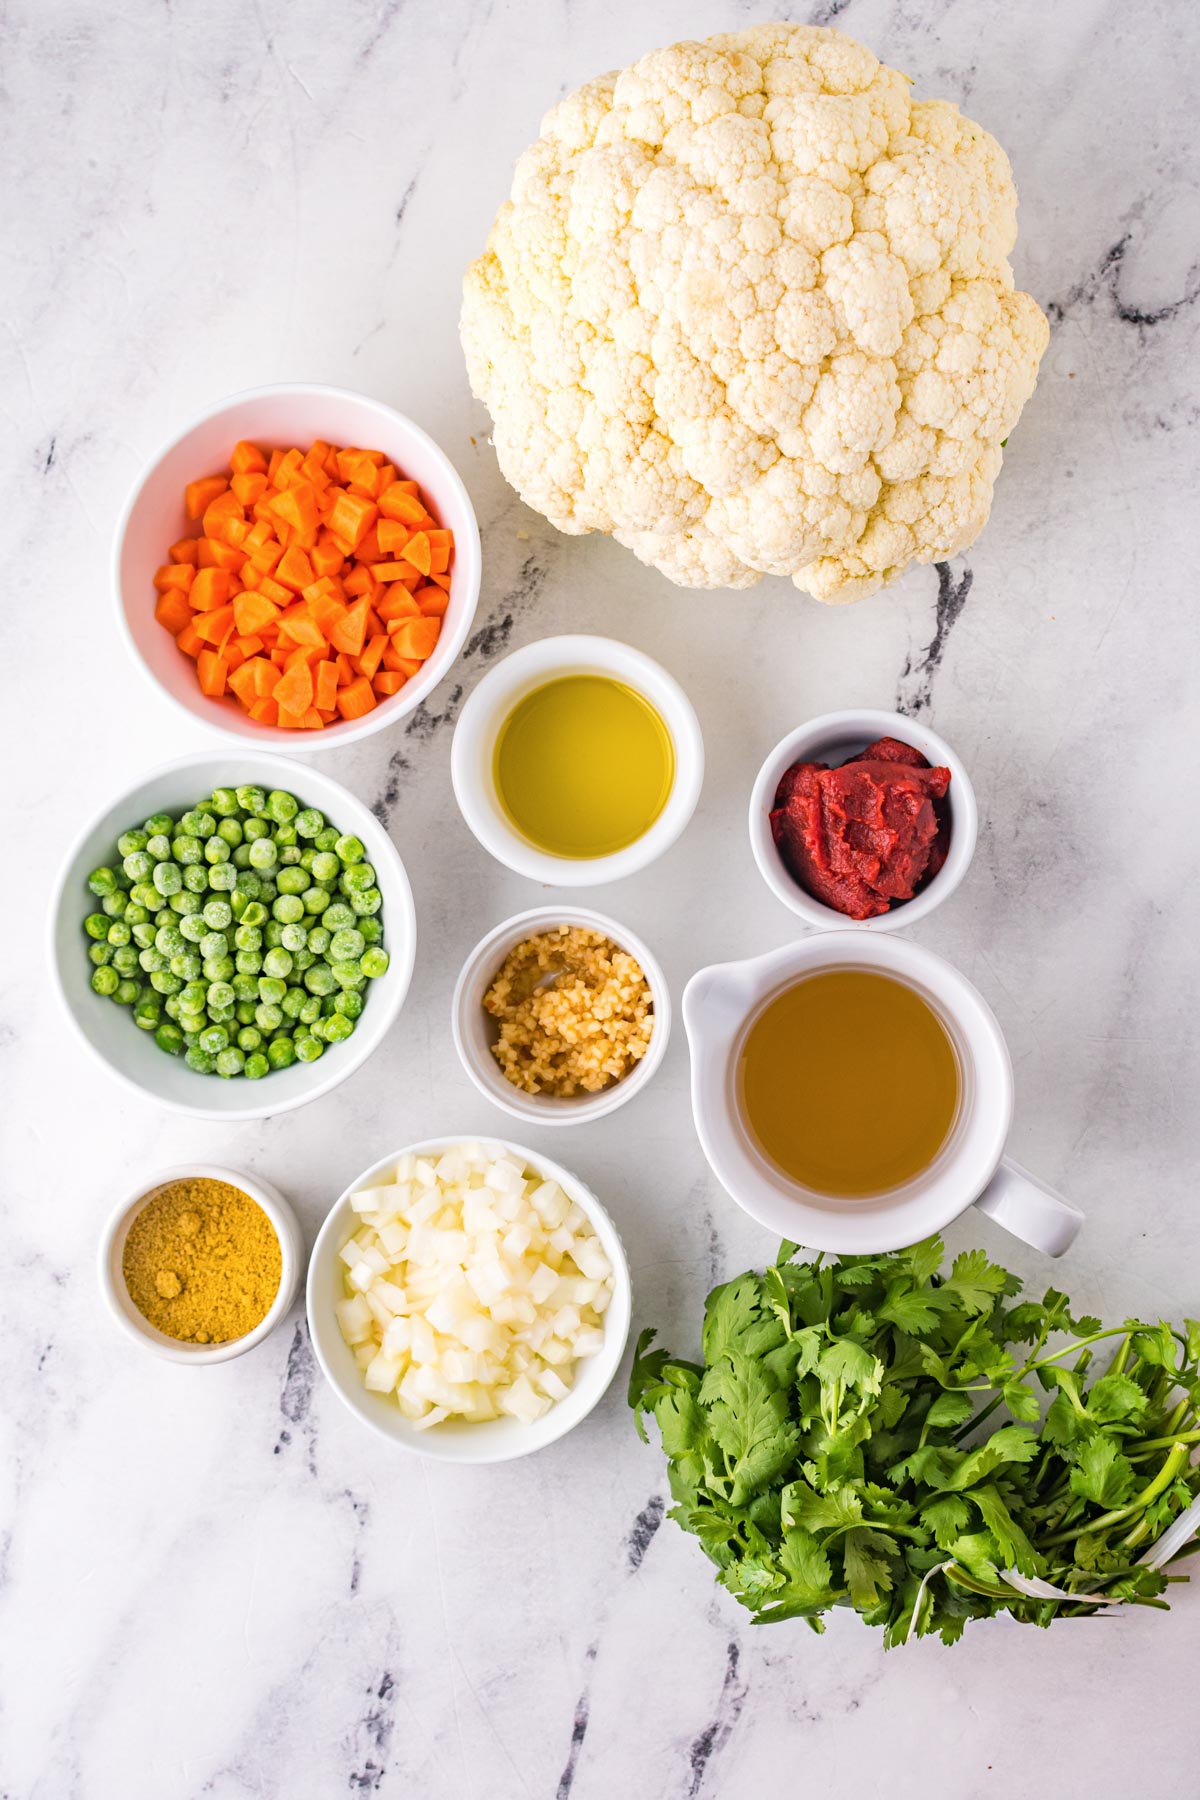 ingredients for Mexican cauliflower rice, including cauliflower, peas, carrots, tomato paste, chicken broth, cilantro